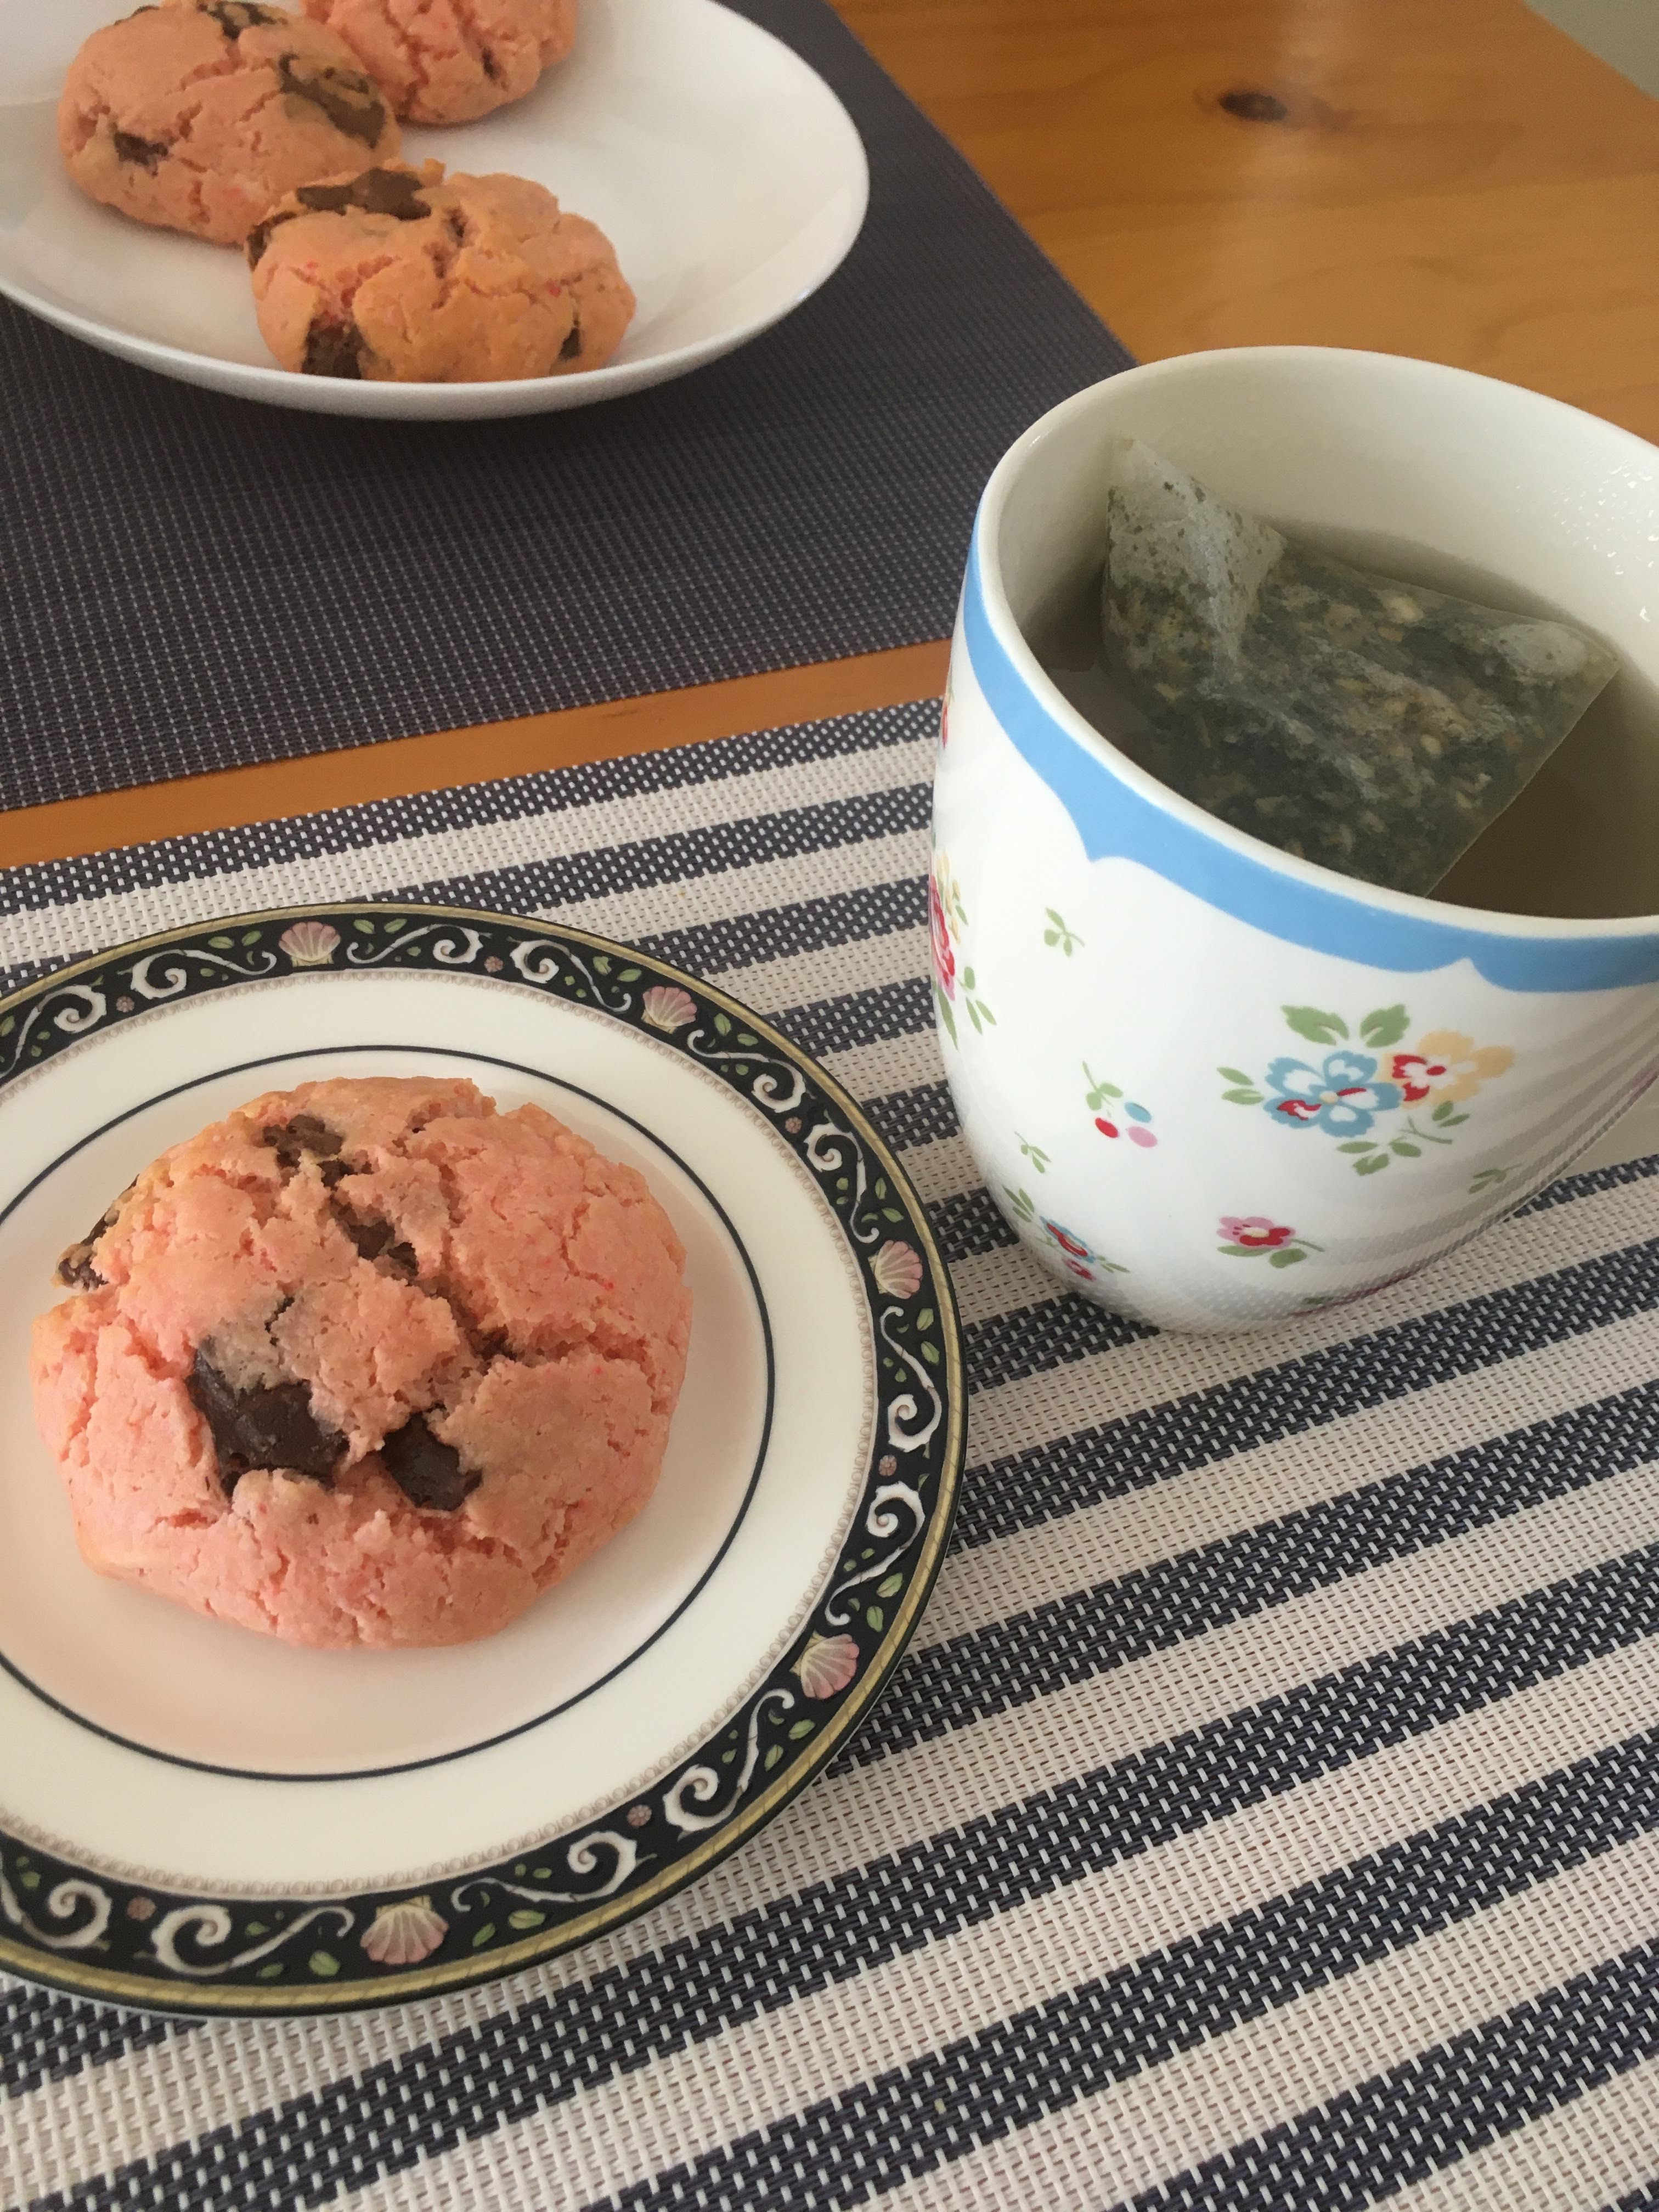 pink biscuits with chocolate chips and a cup of tea